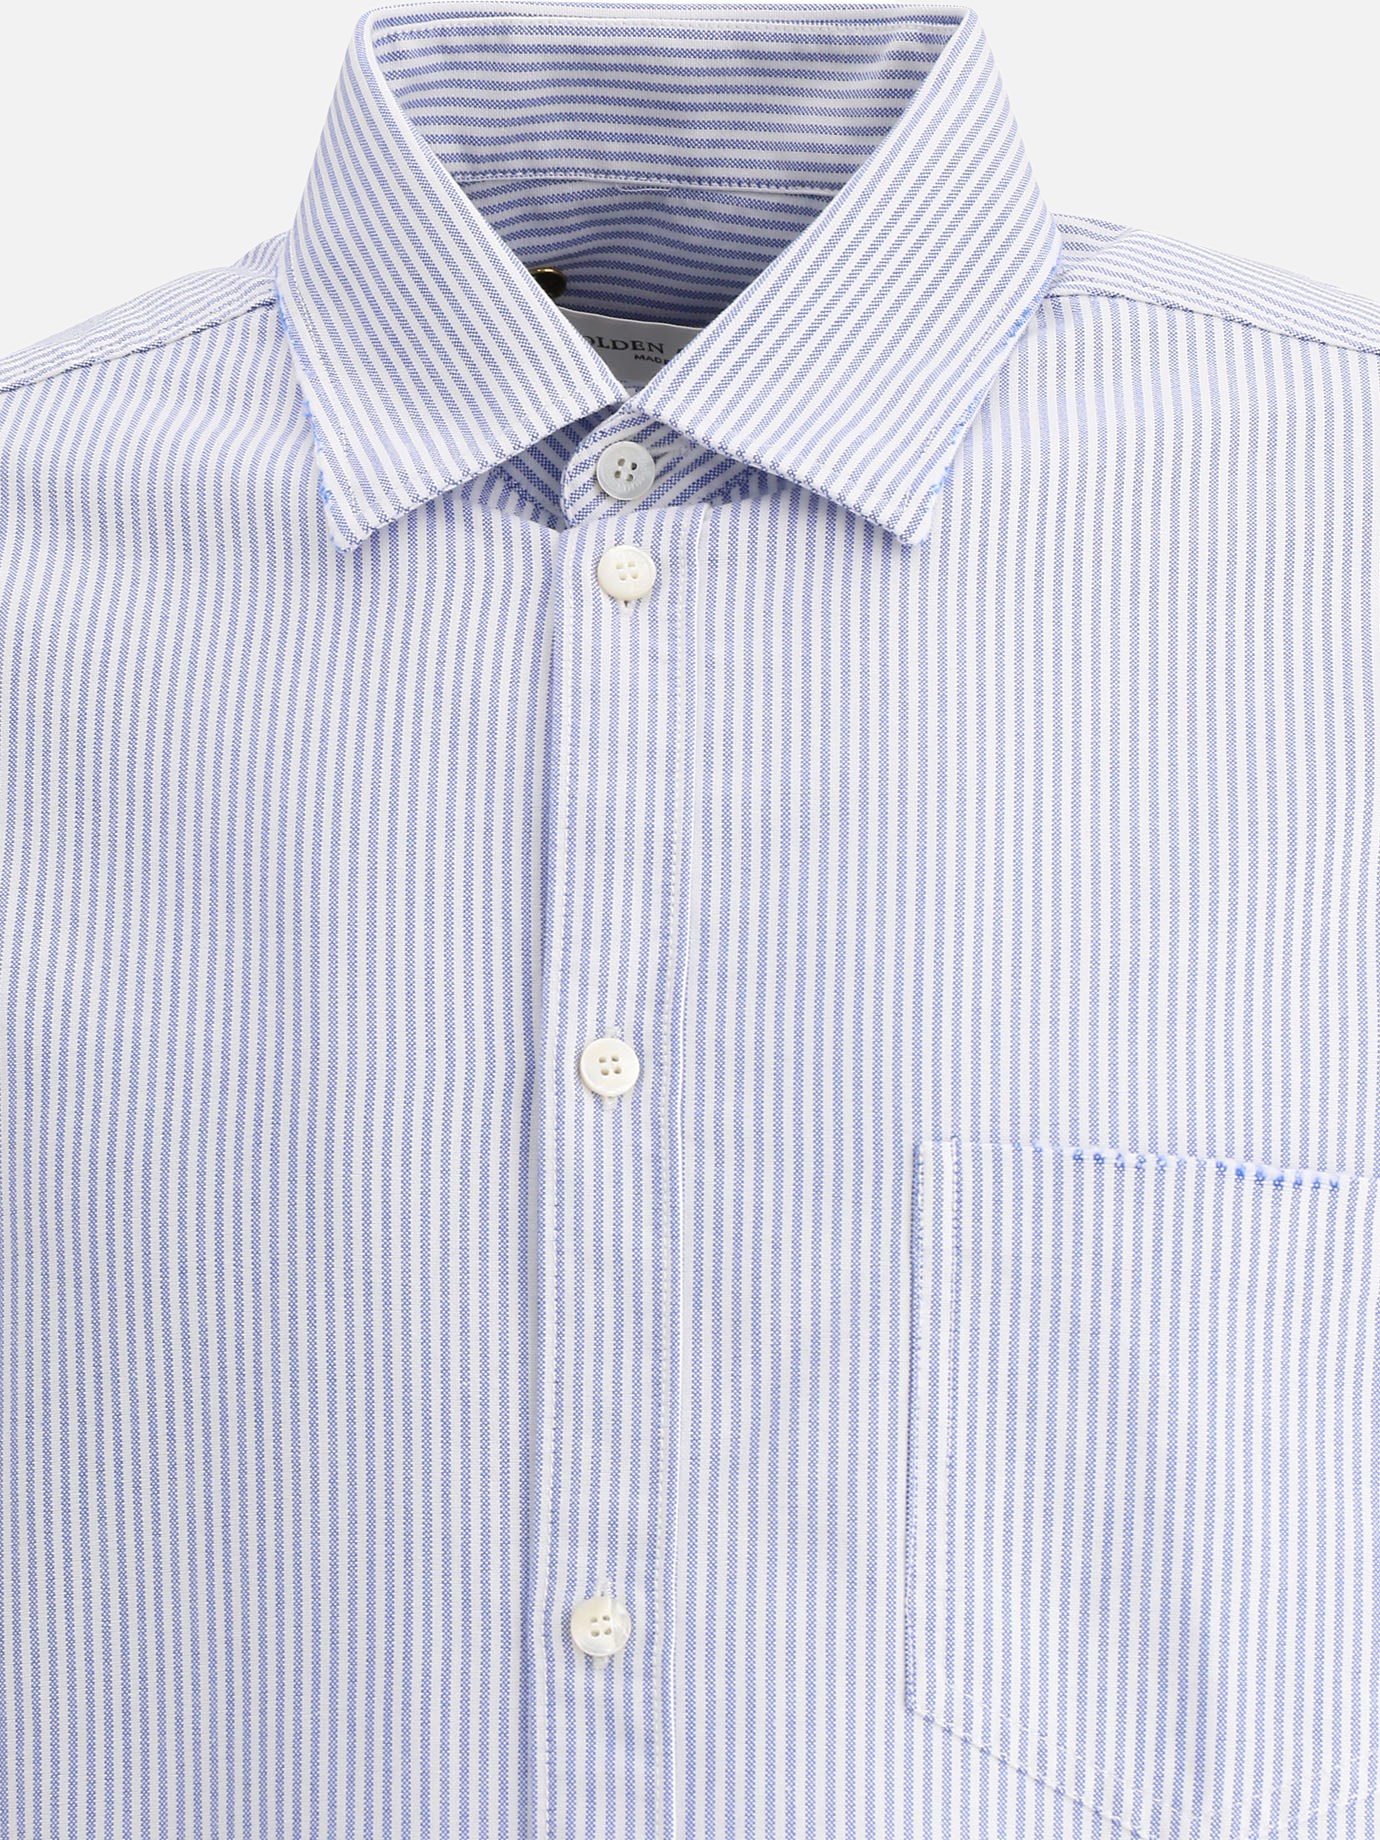  Alvise  striped shirt by Golden Goose